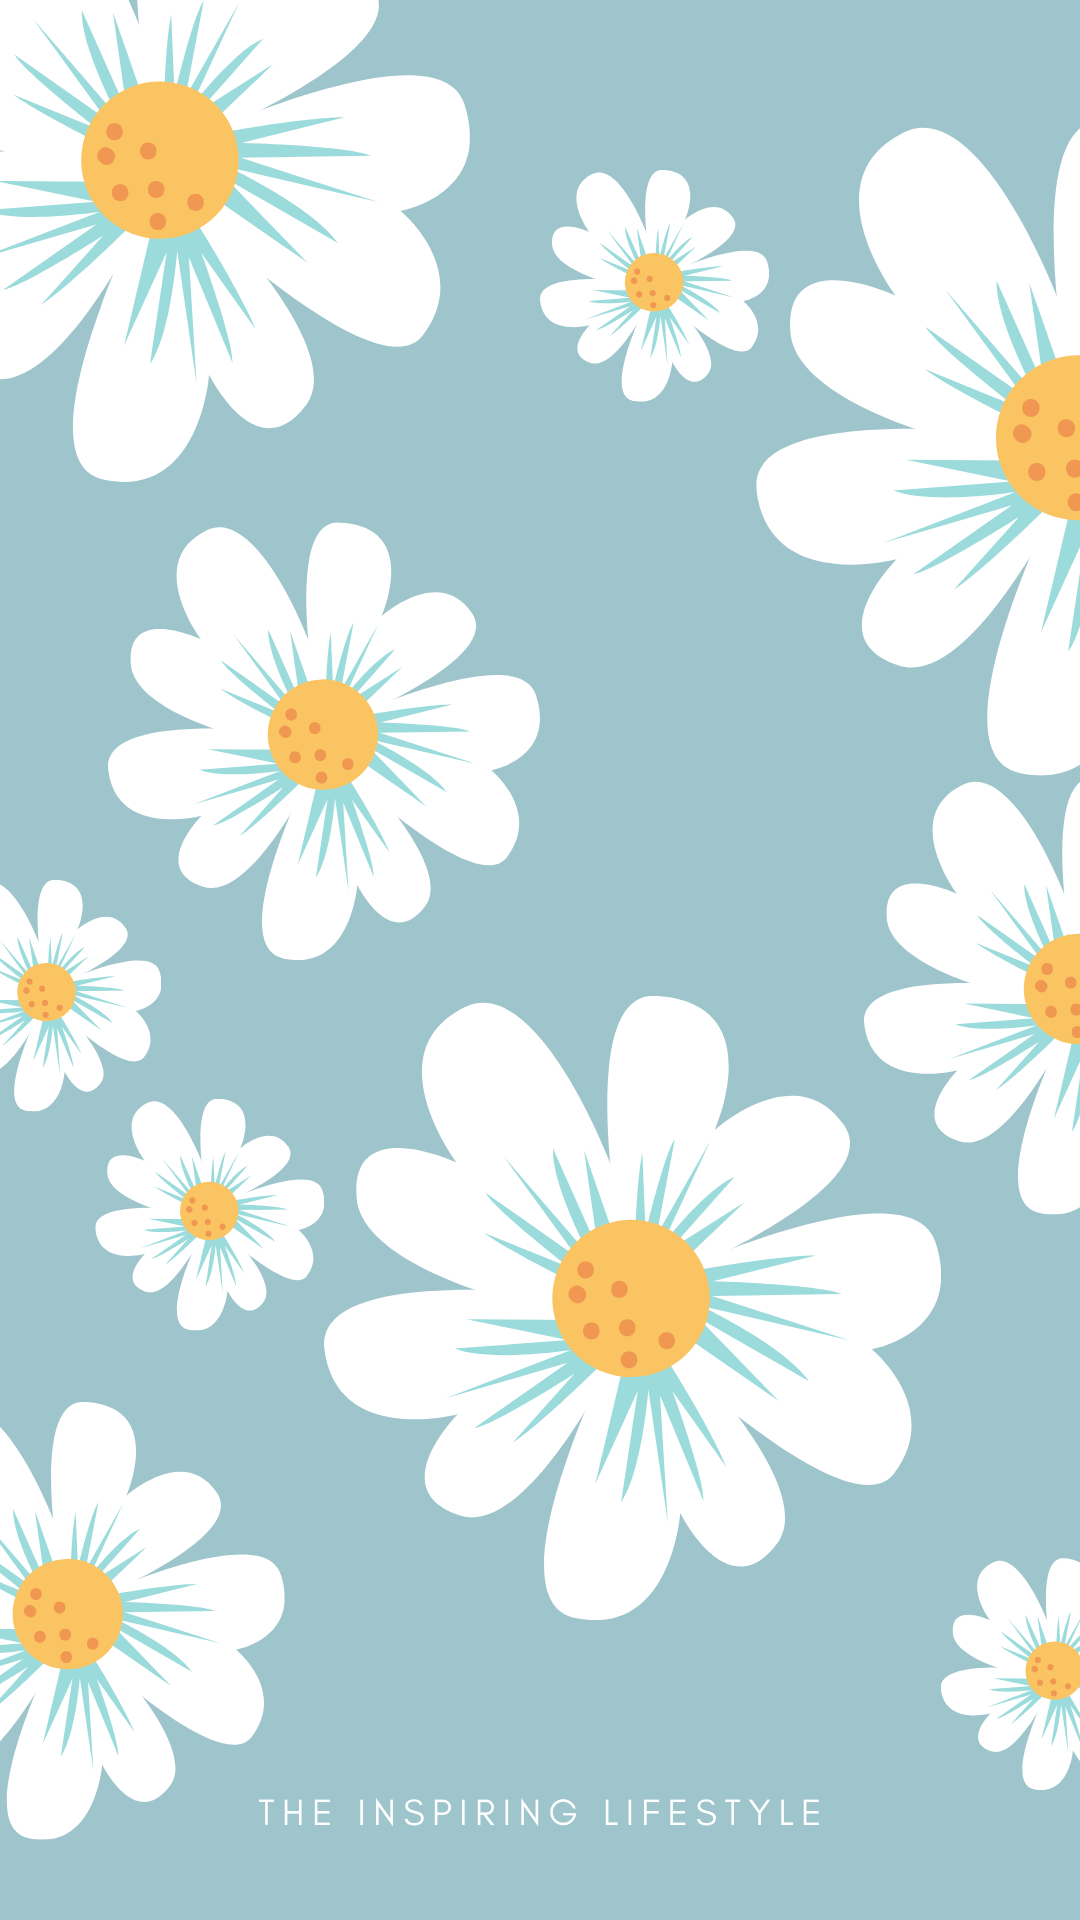 A phone wallpaper with white flowers on a blue background - Daisy